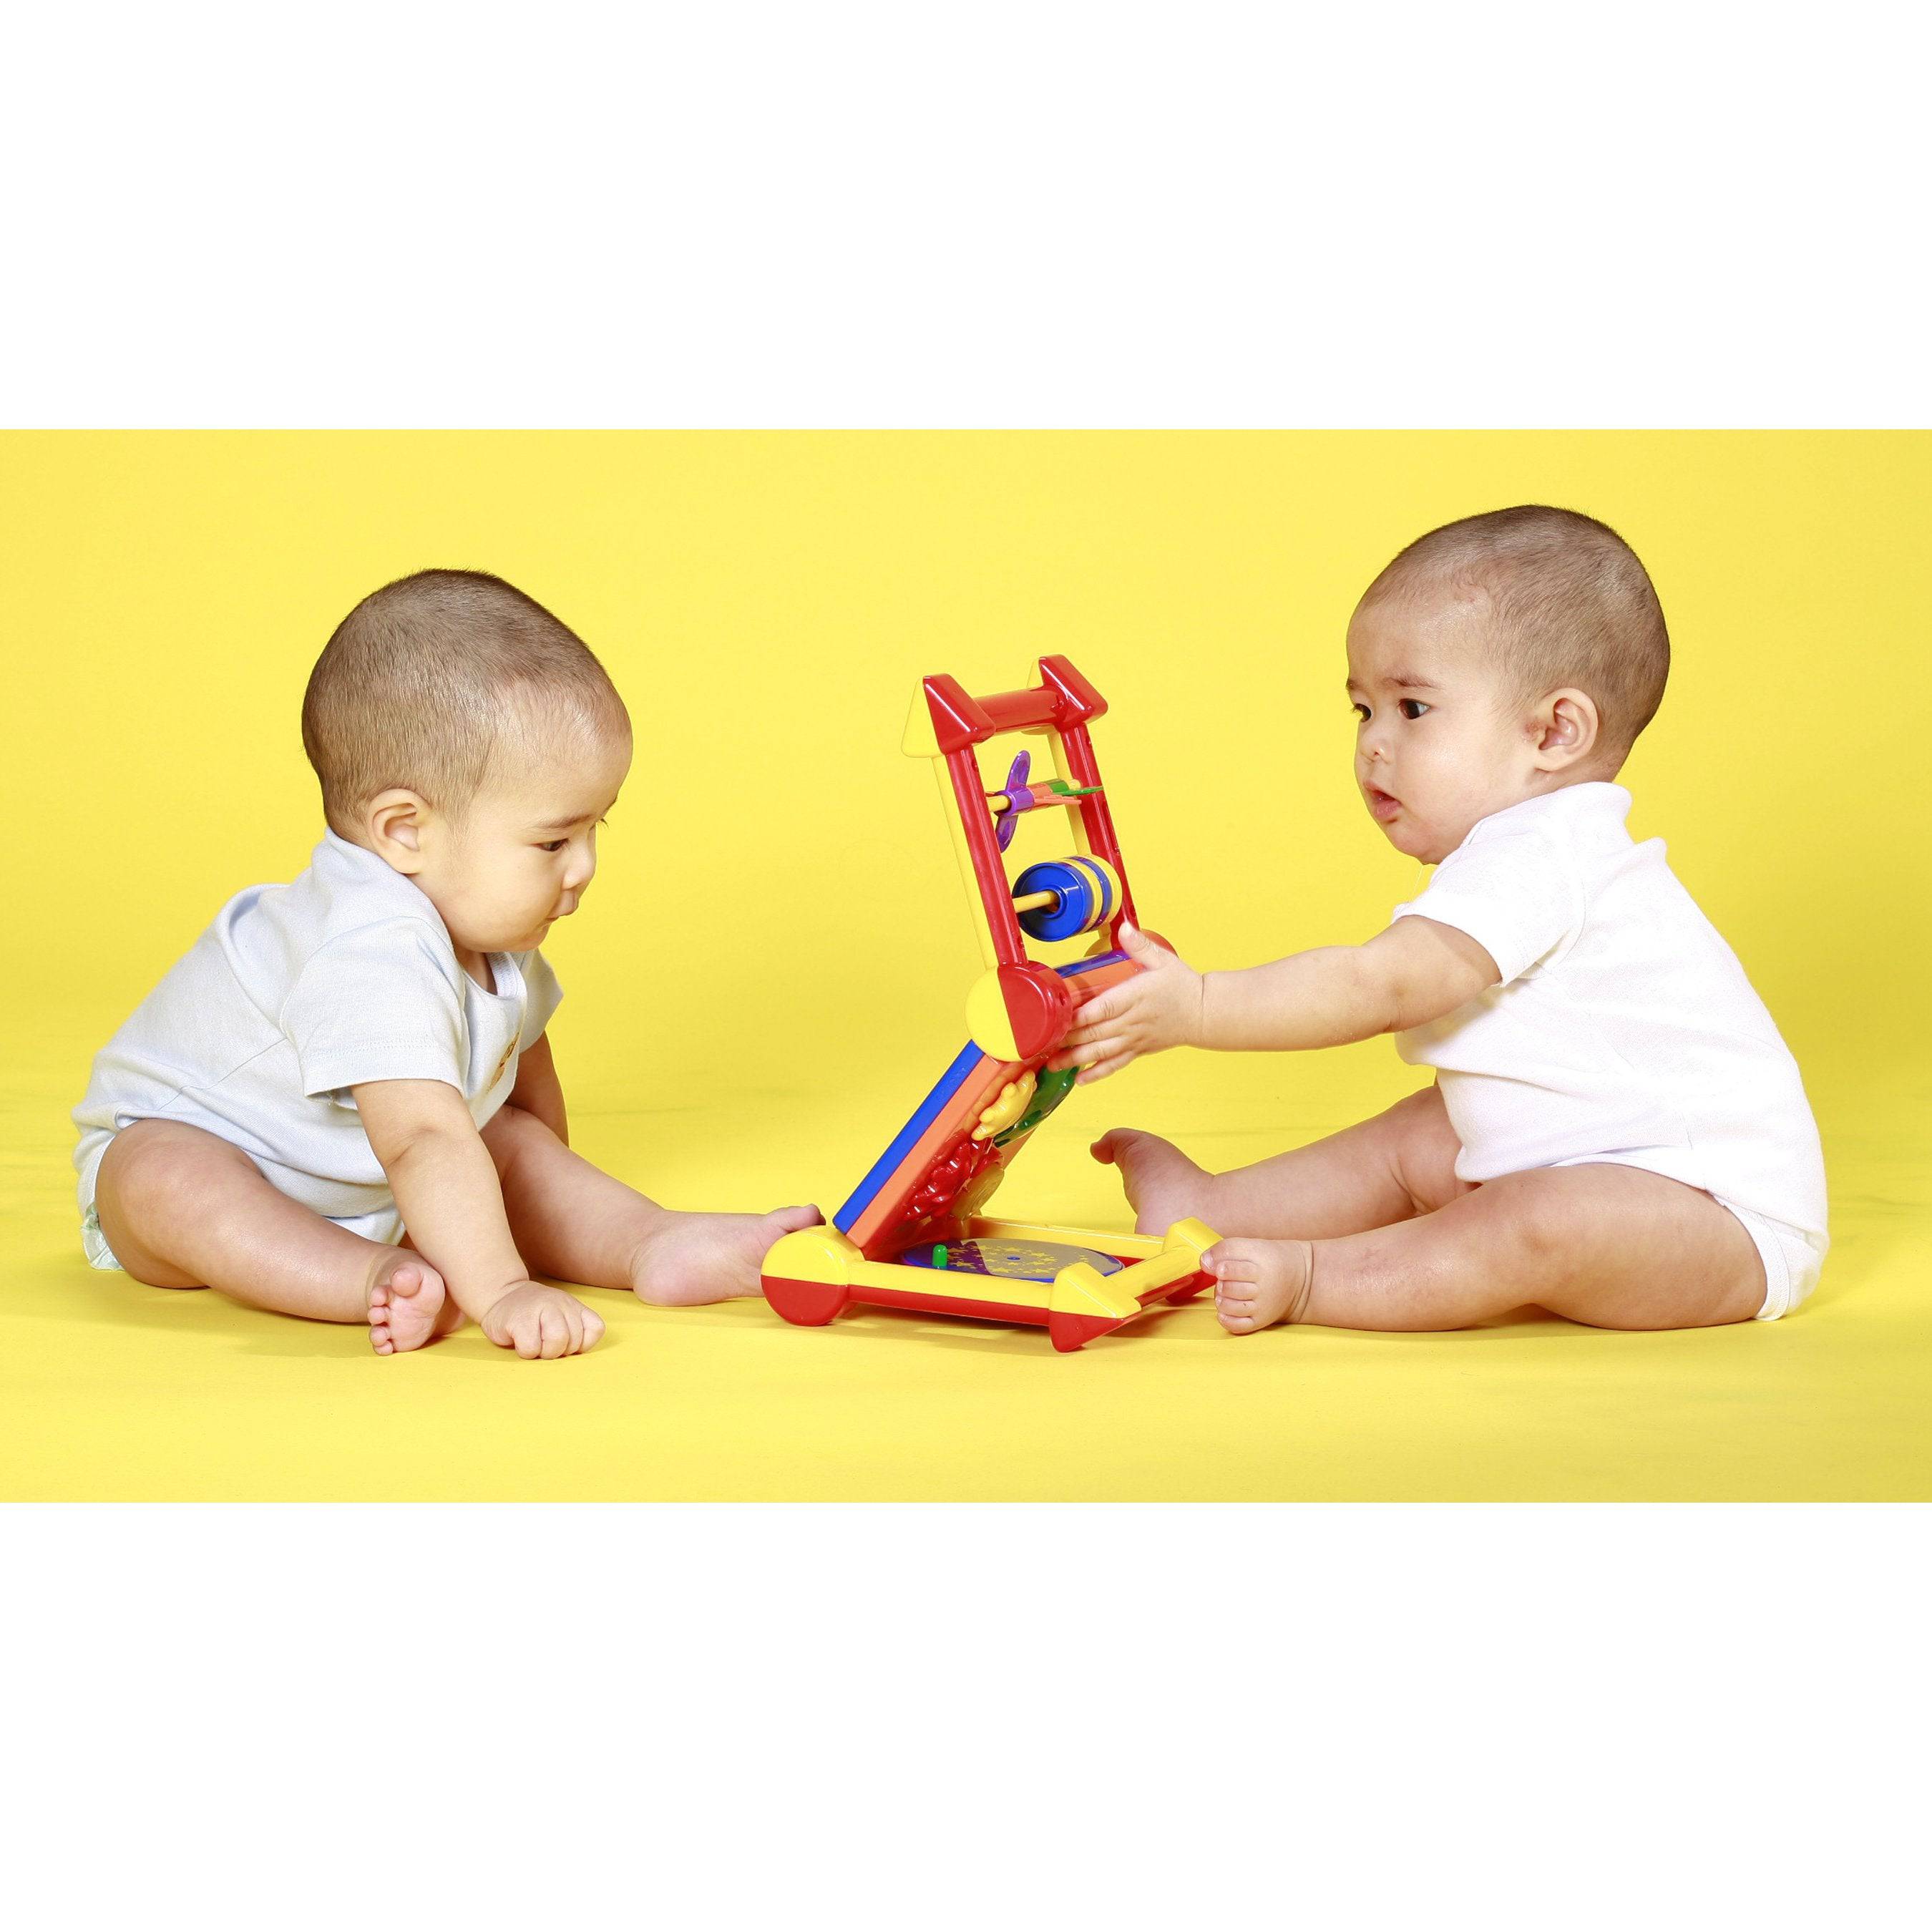 TRY-ANGLE Foldable Newborn Baby Activity Center - Discovery Toys